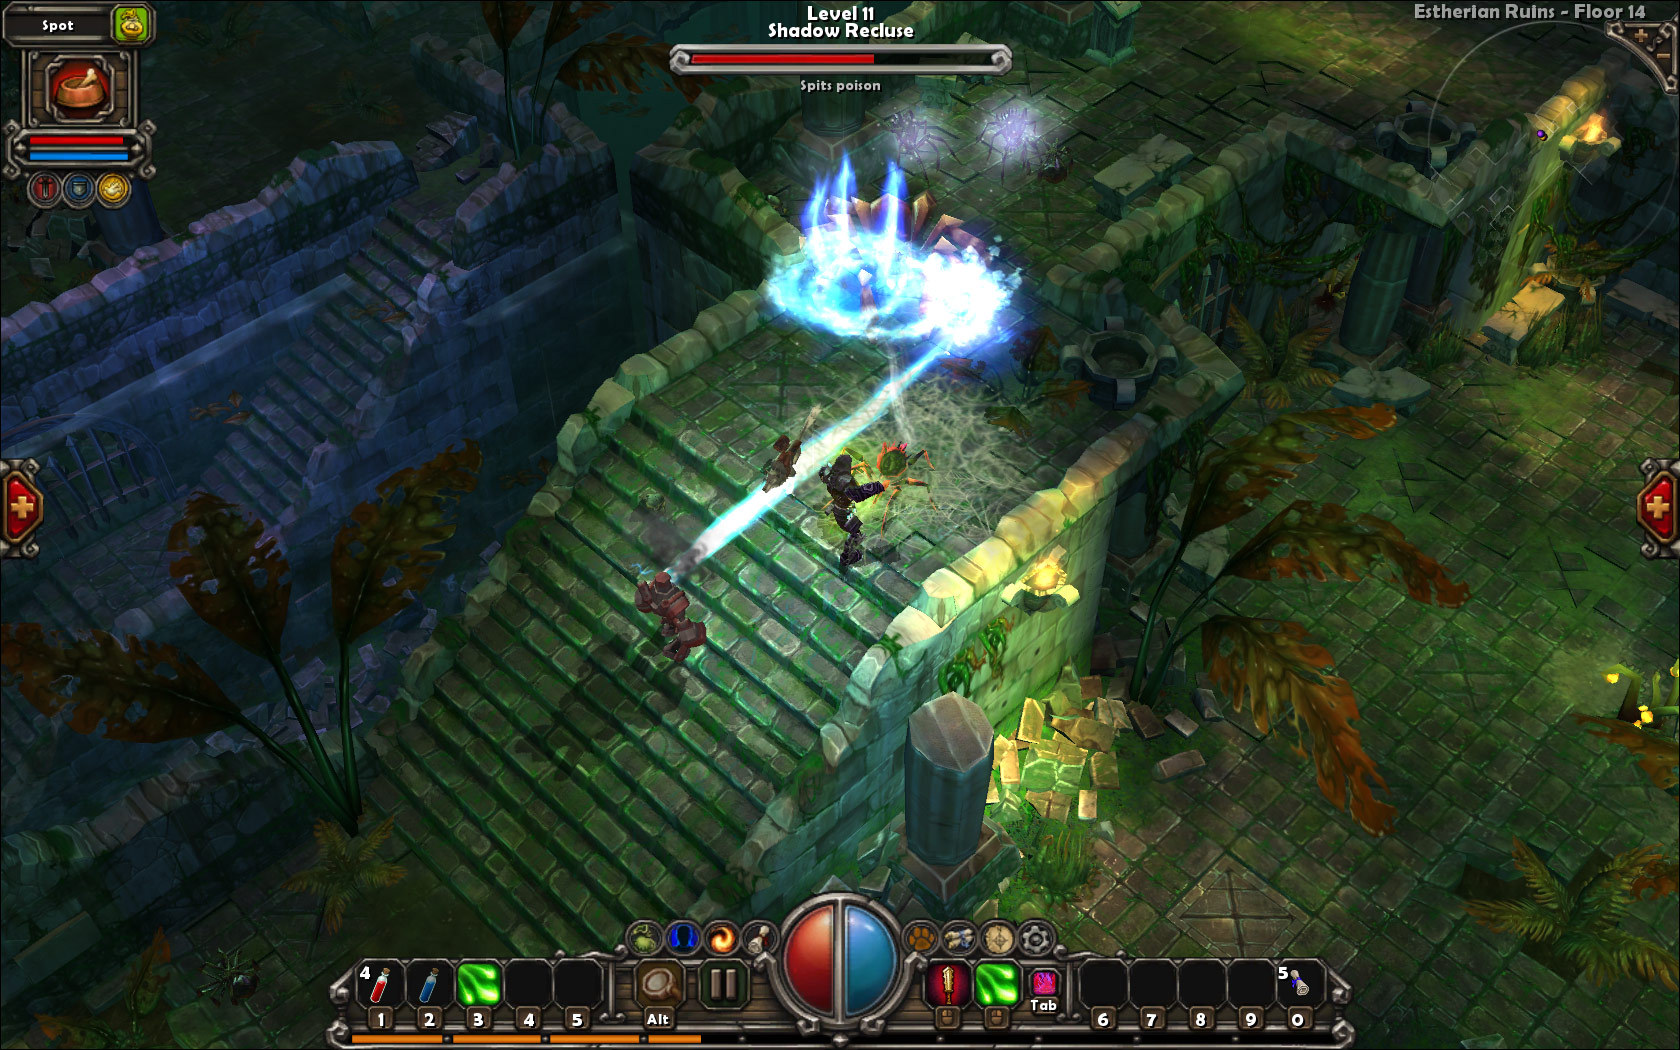 games like torchlight 2 download